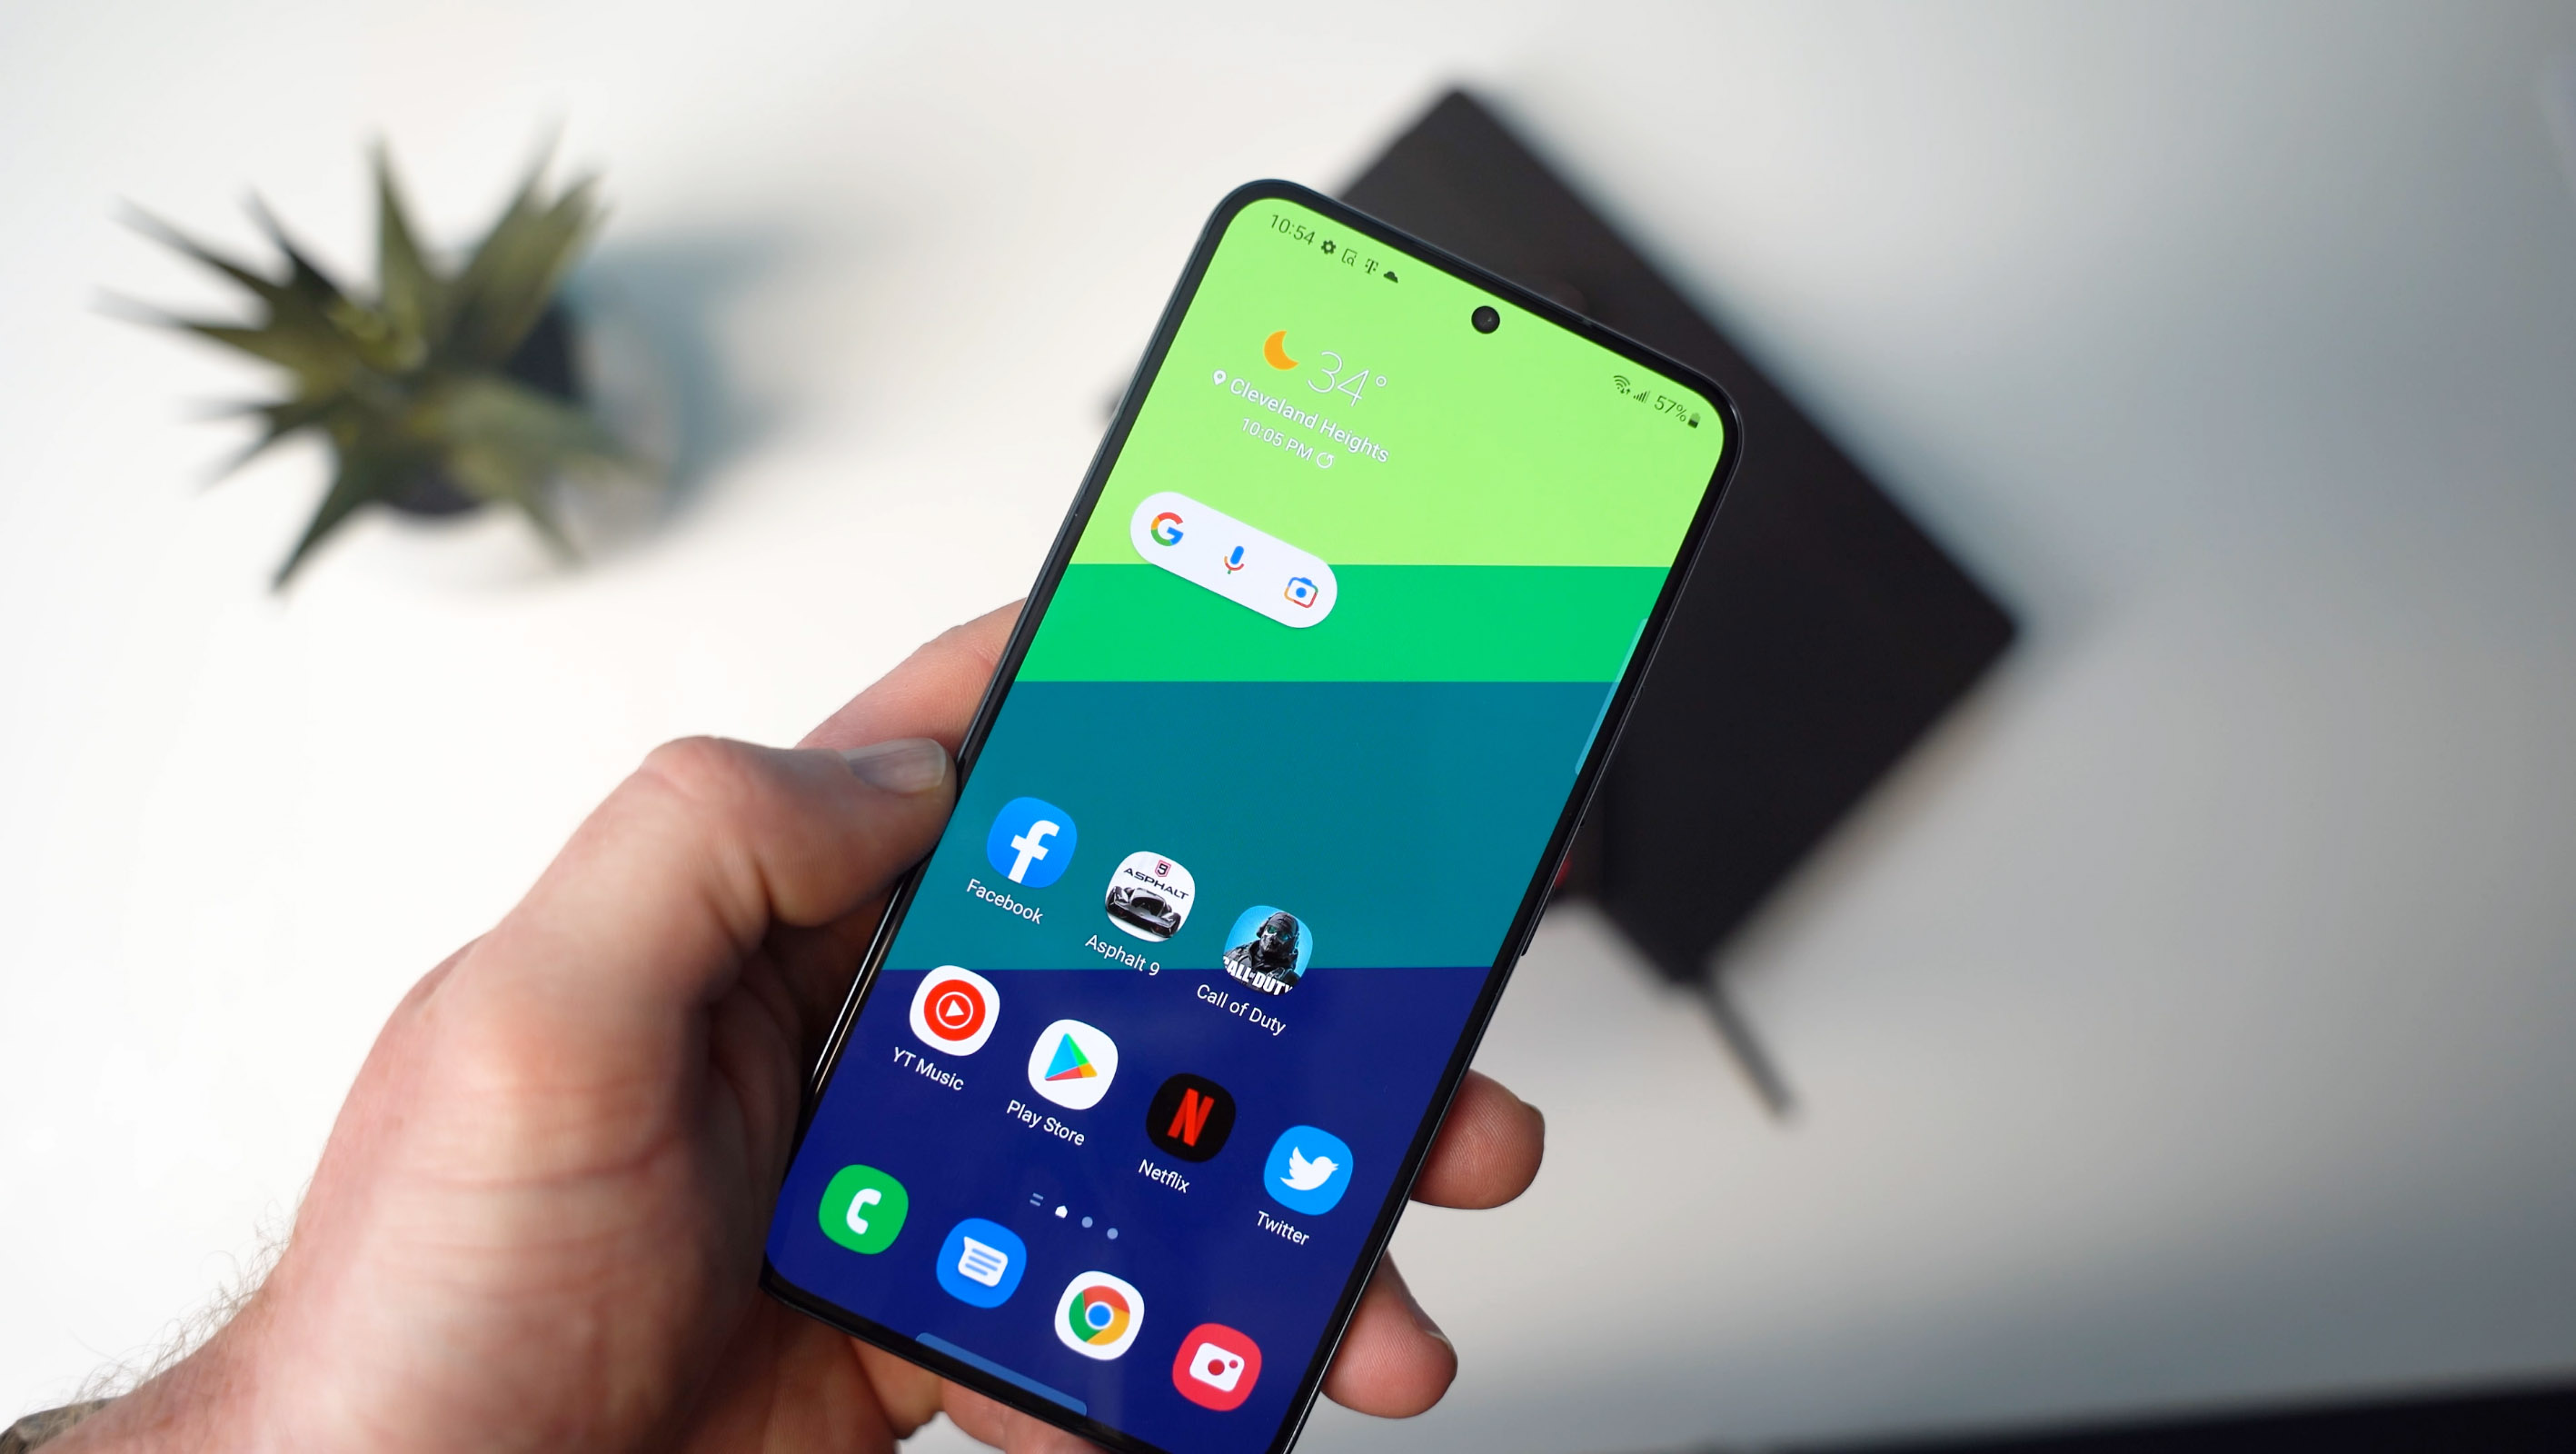 Samsung phones hit with green lines display issues again